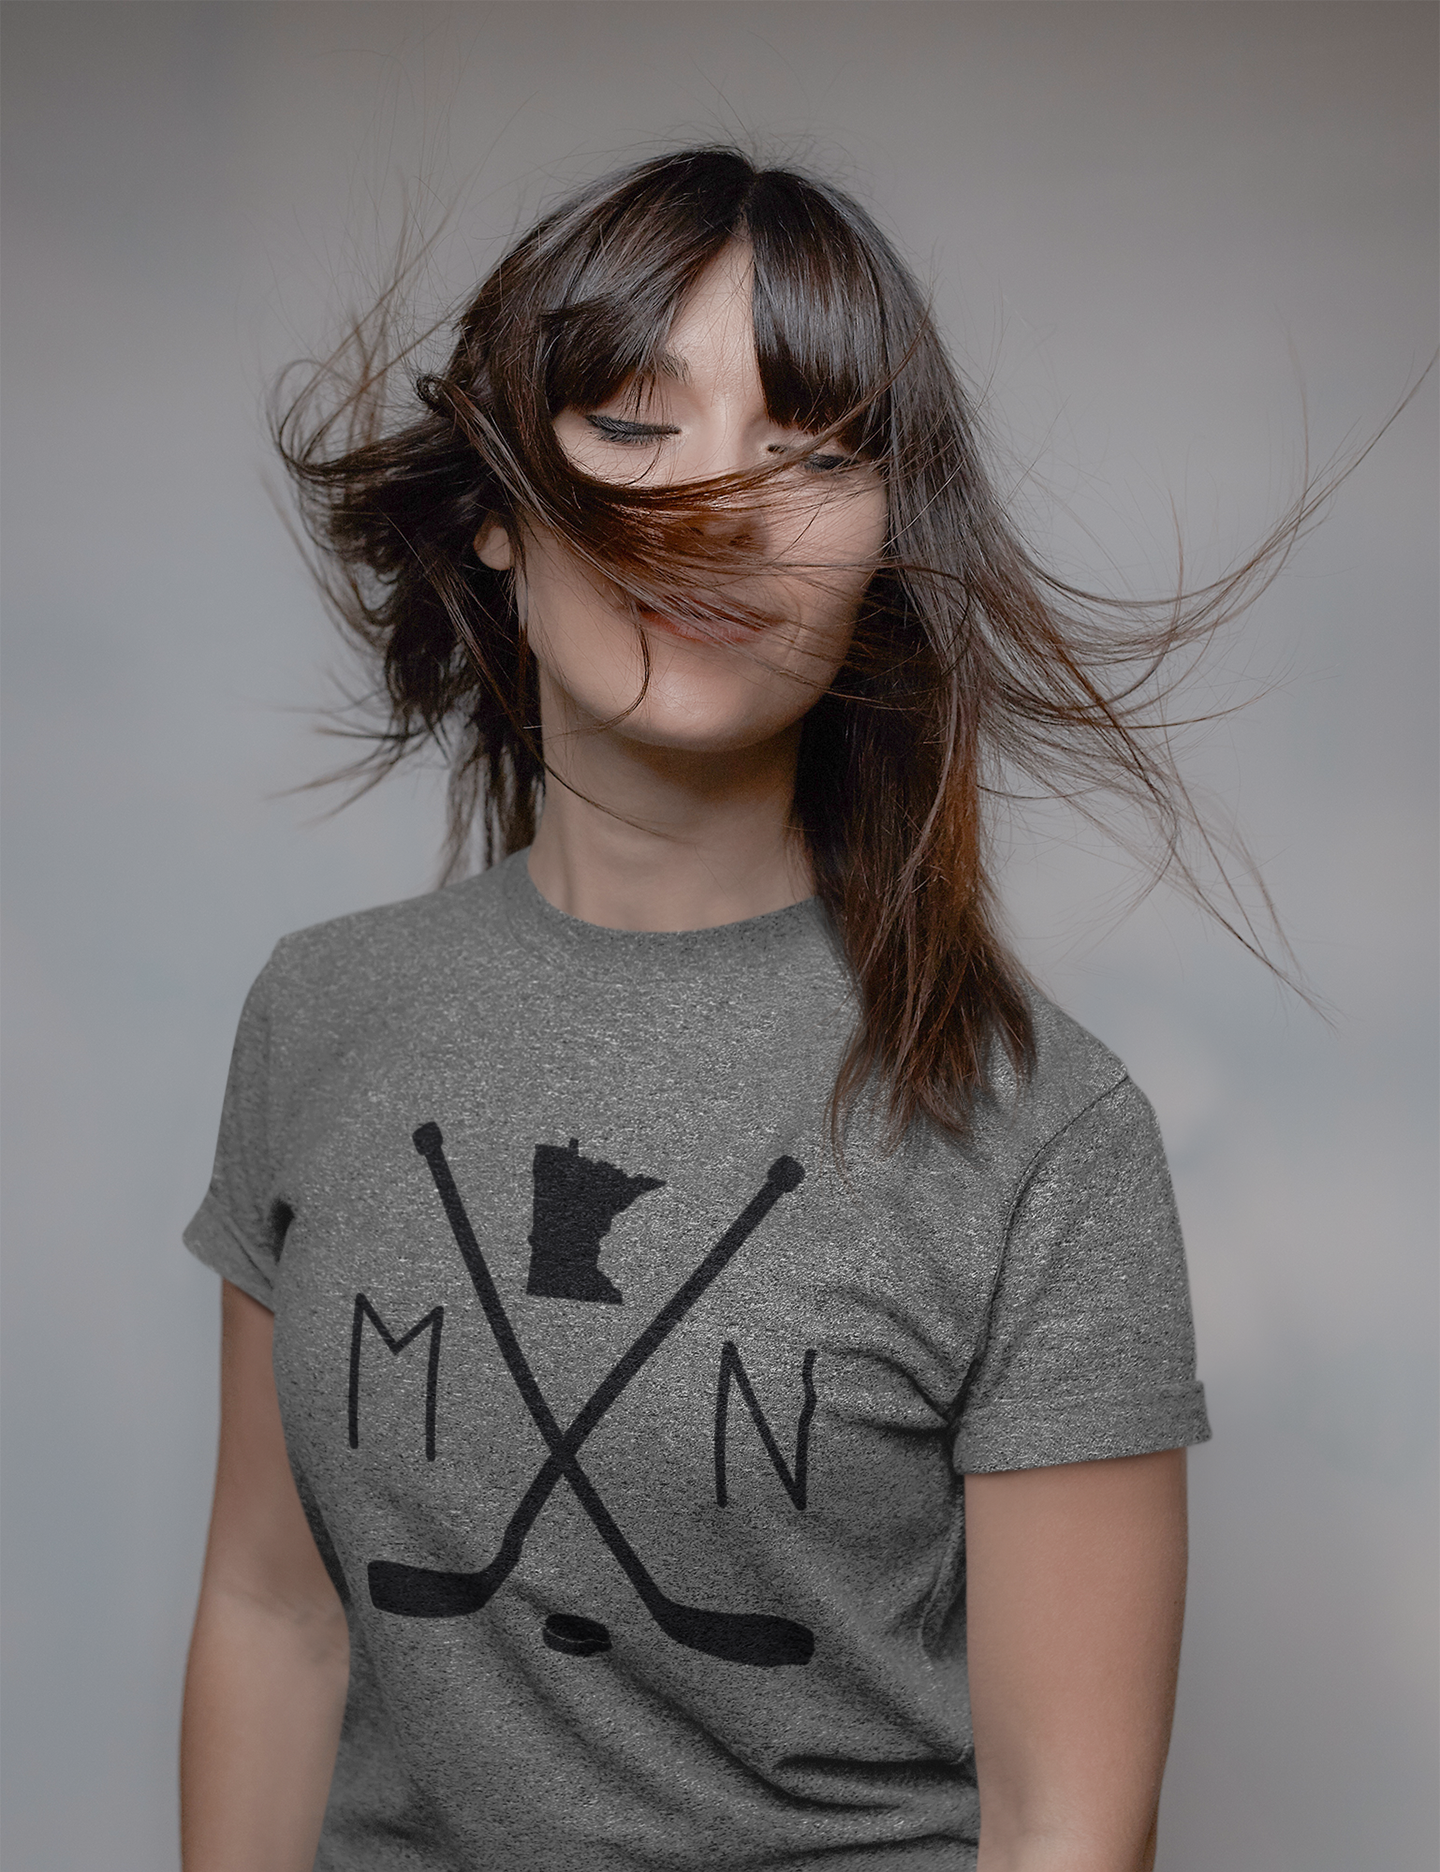 Heather Gray Minnesota Hockey T-Shirt. On the front has a black design with to hockey sticks faced like an X with a puck below in. An M to the left, an N to the right, and an outline of the state of minnesota up top. This is the front view of the shirt on a model whipping her hair around.